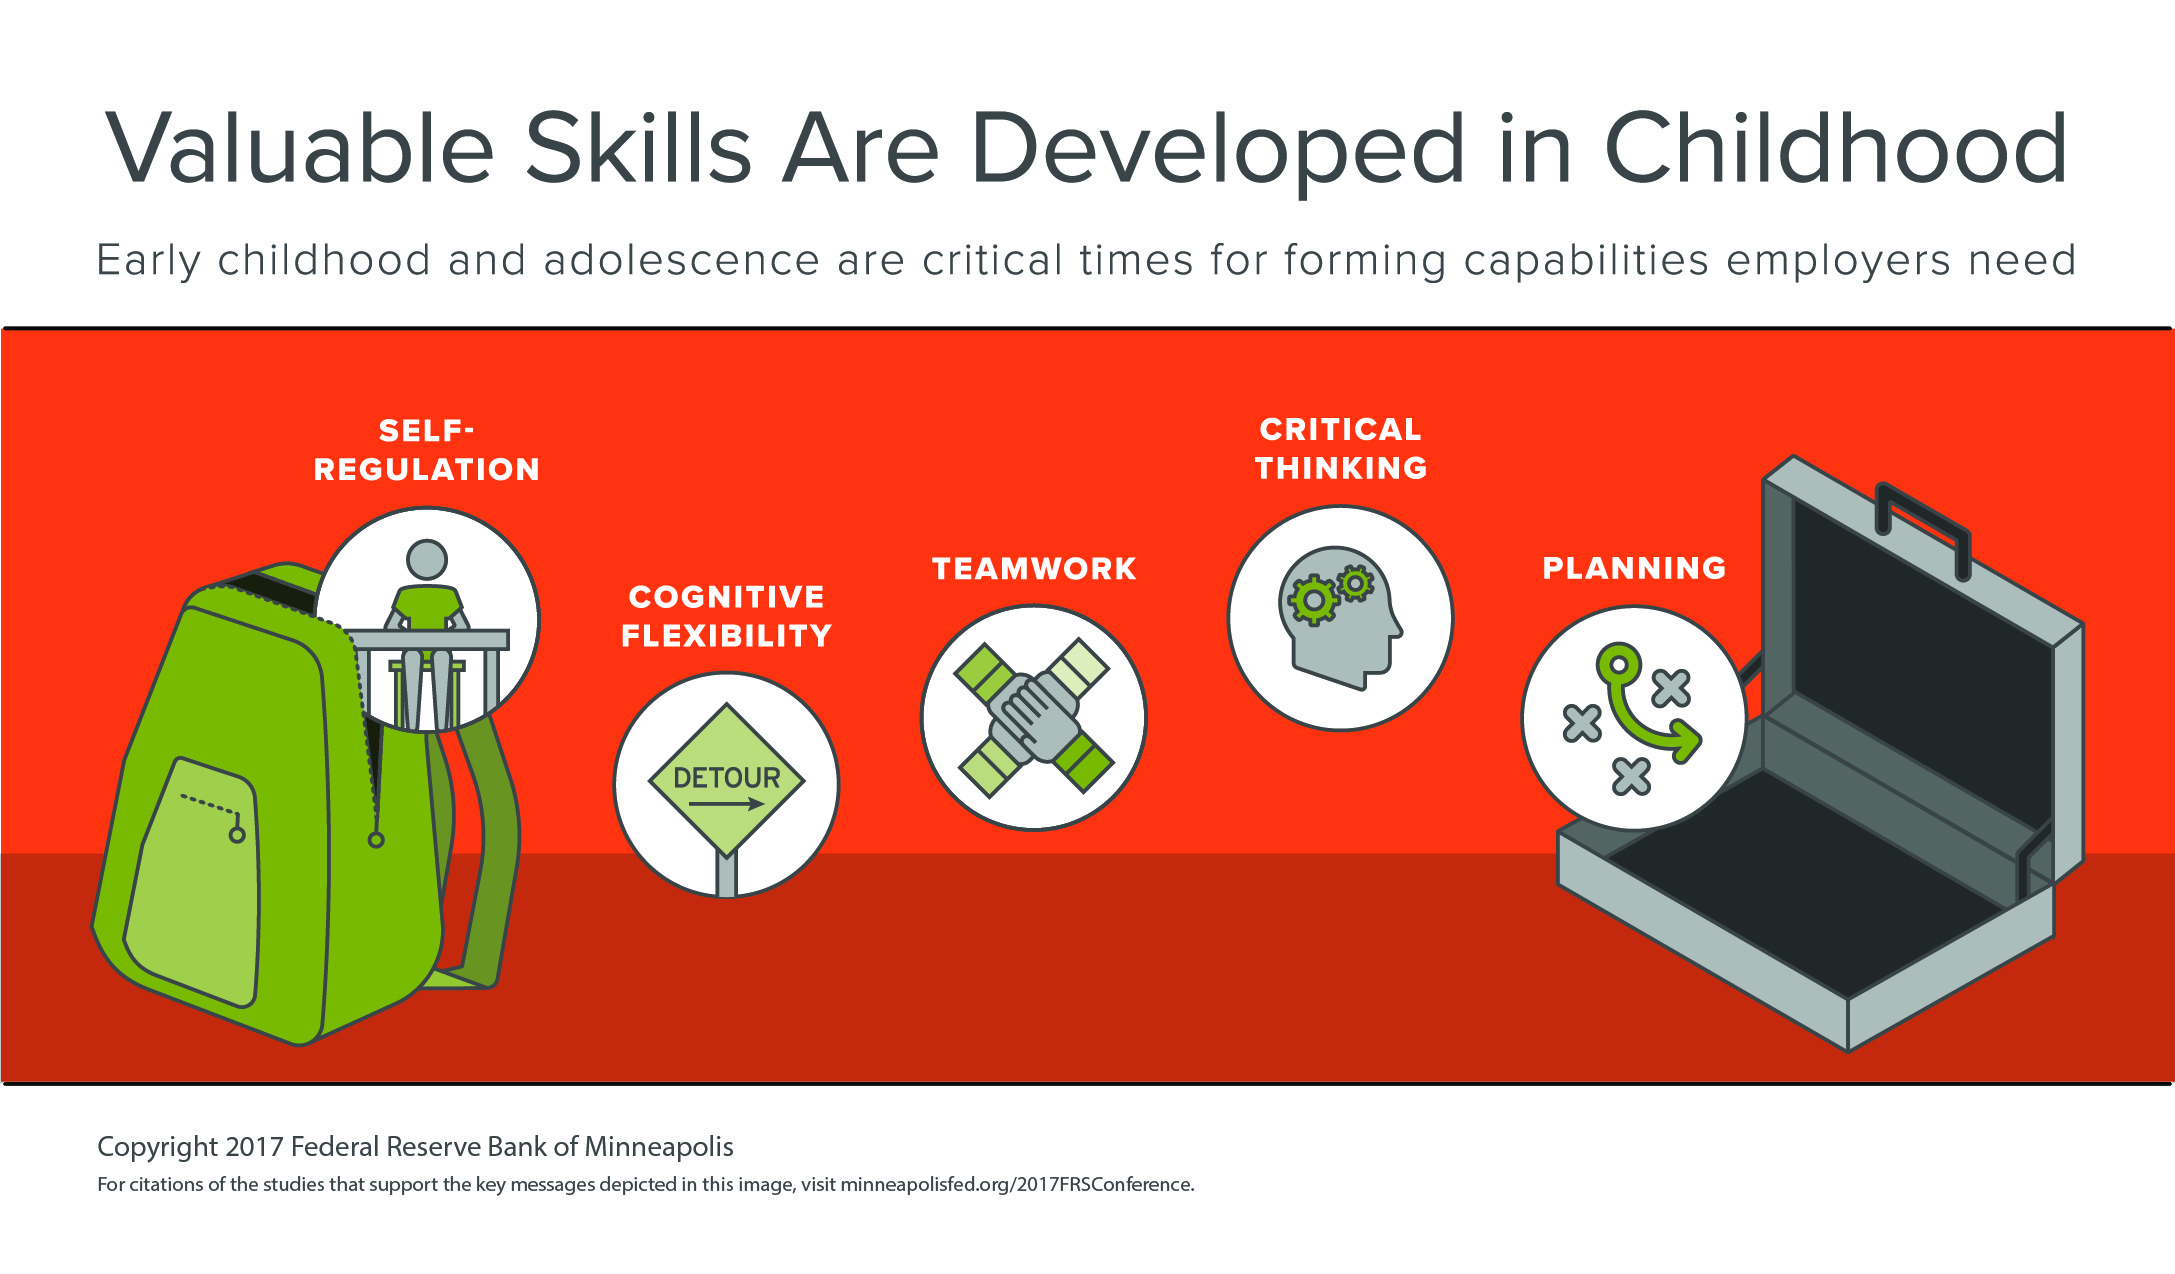 Valuable Skills Are Developed in Childhood